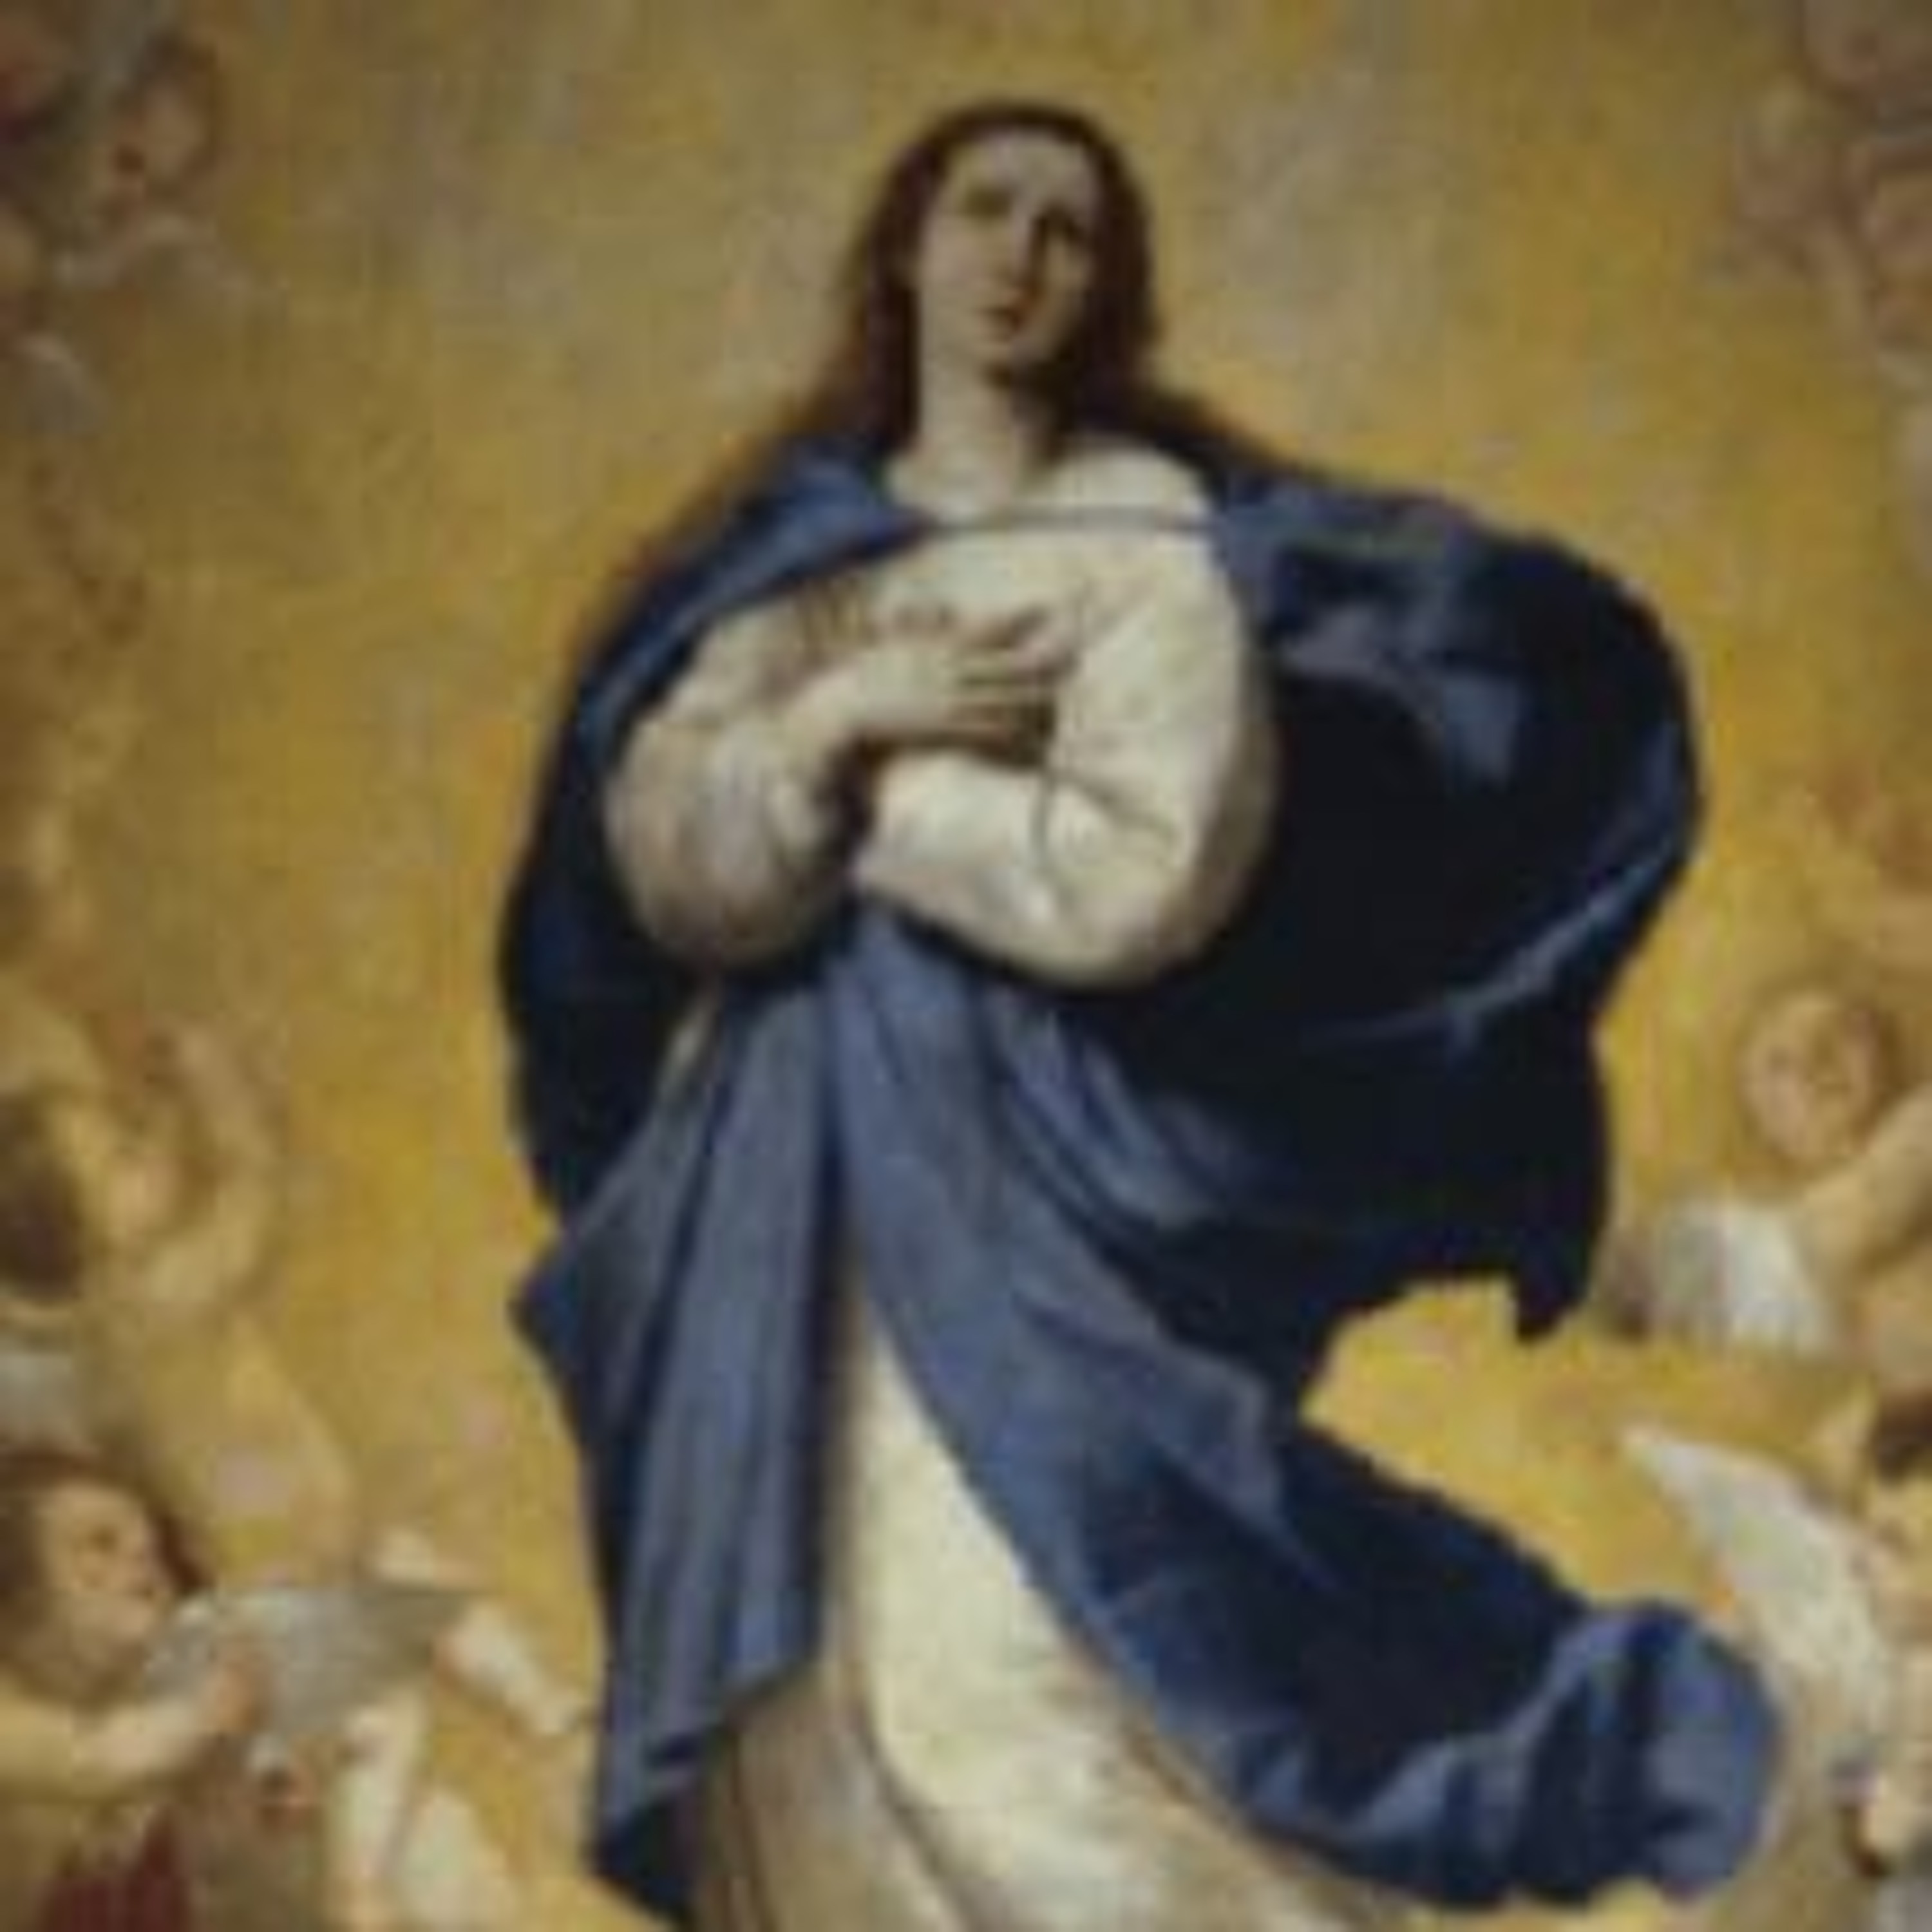 Assumption of the Blessed Virgin: Evening Prayer According to the 2019 Book of Common Prayer (ACNA)